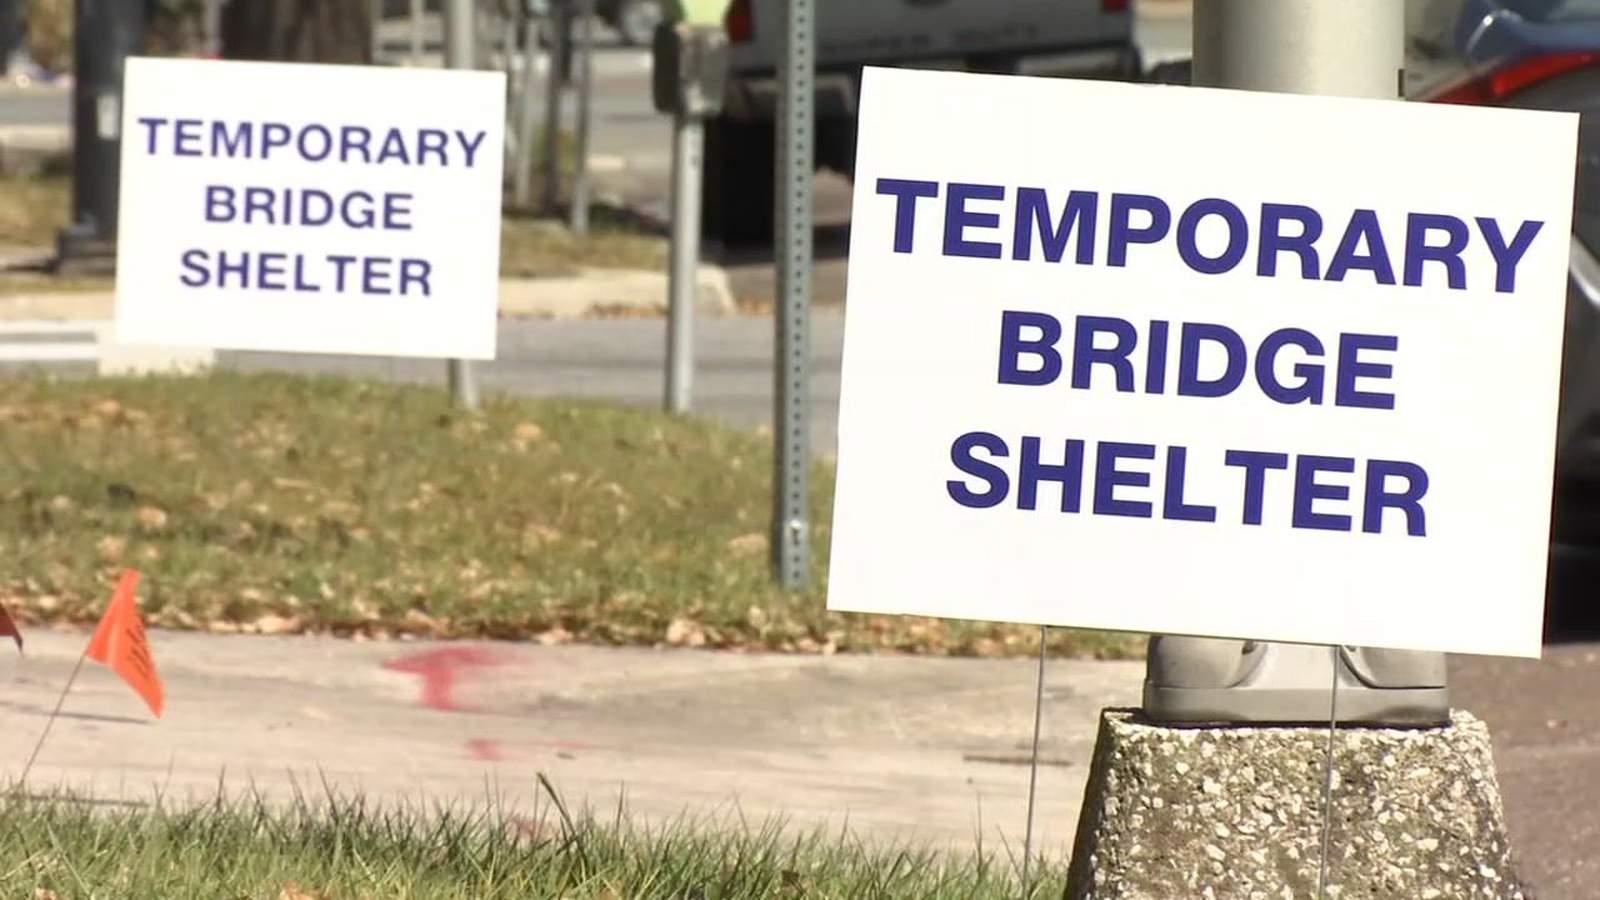 While ‘bridge’ shelter just opened, city is hurrying to find solutions before it closes